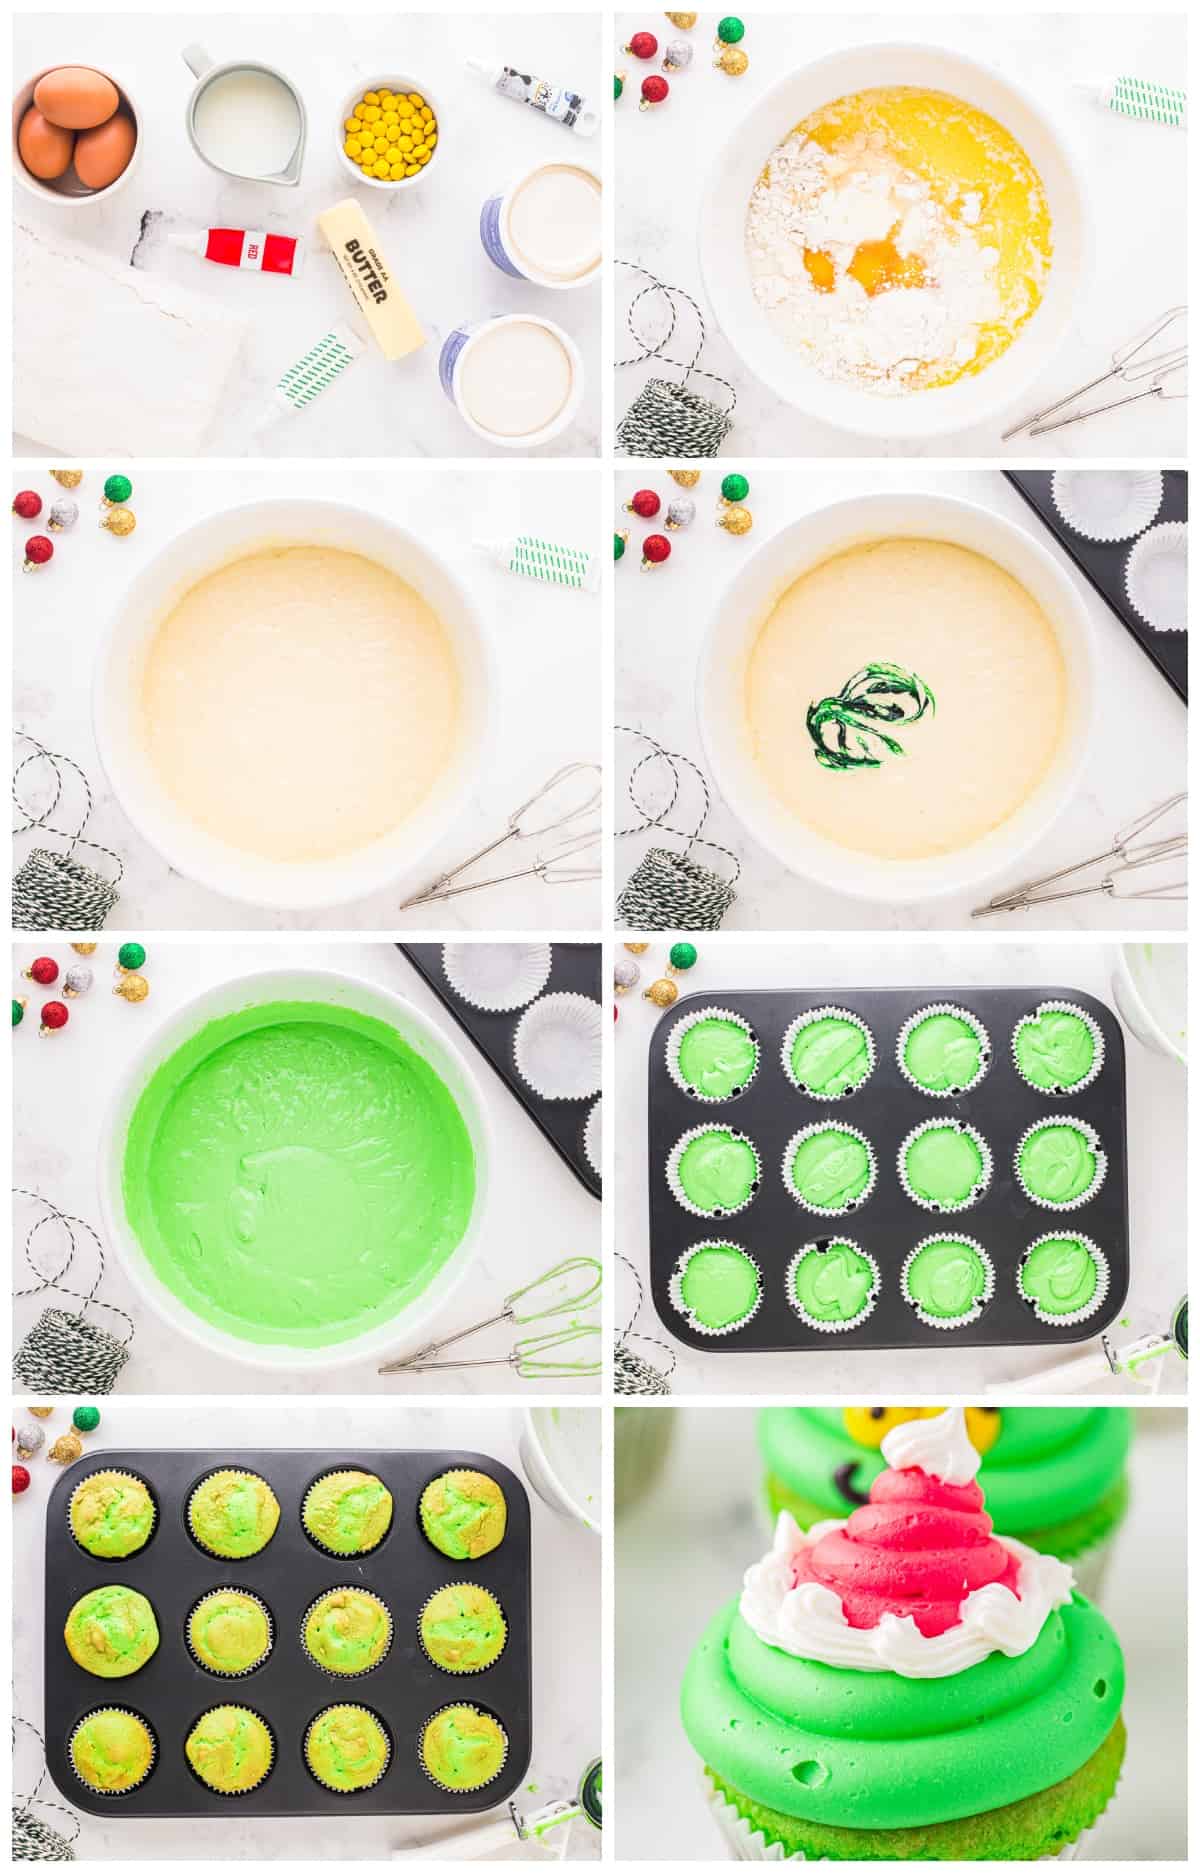 how to make grinch cupcakes step by step photo instructions